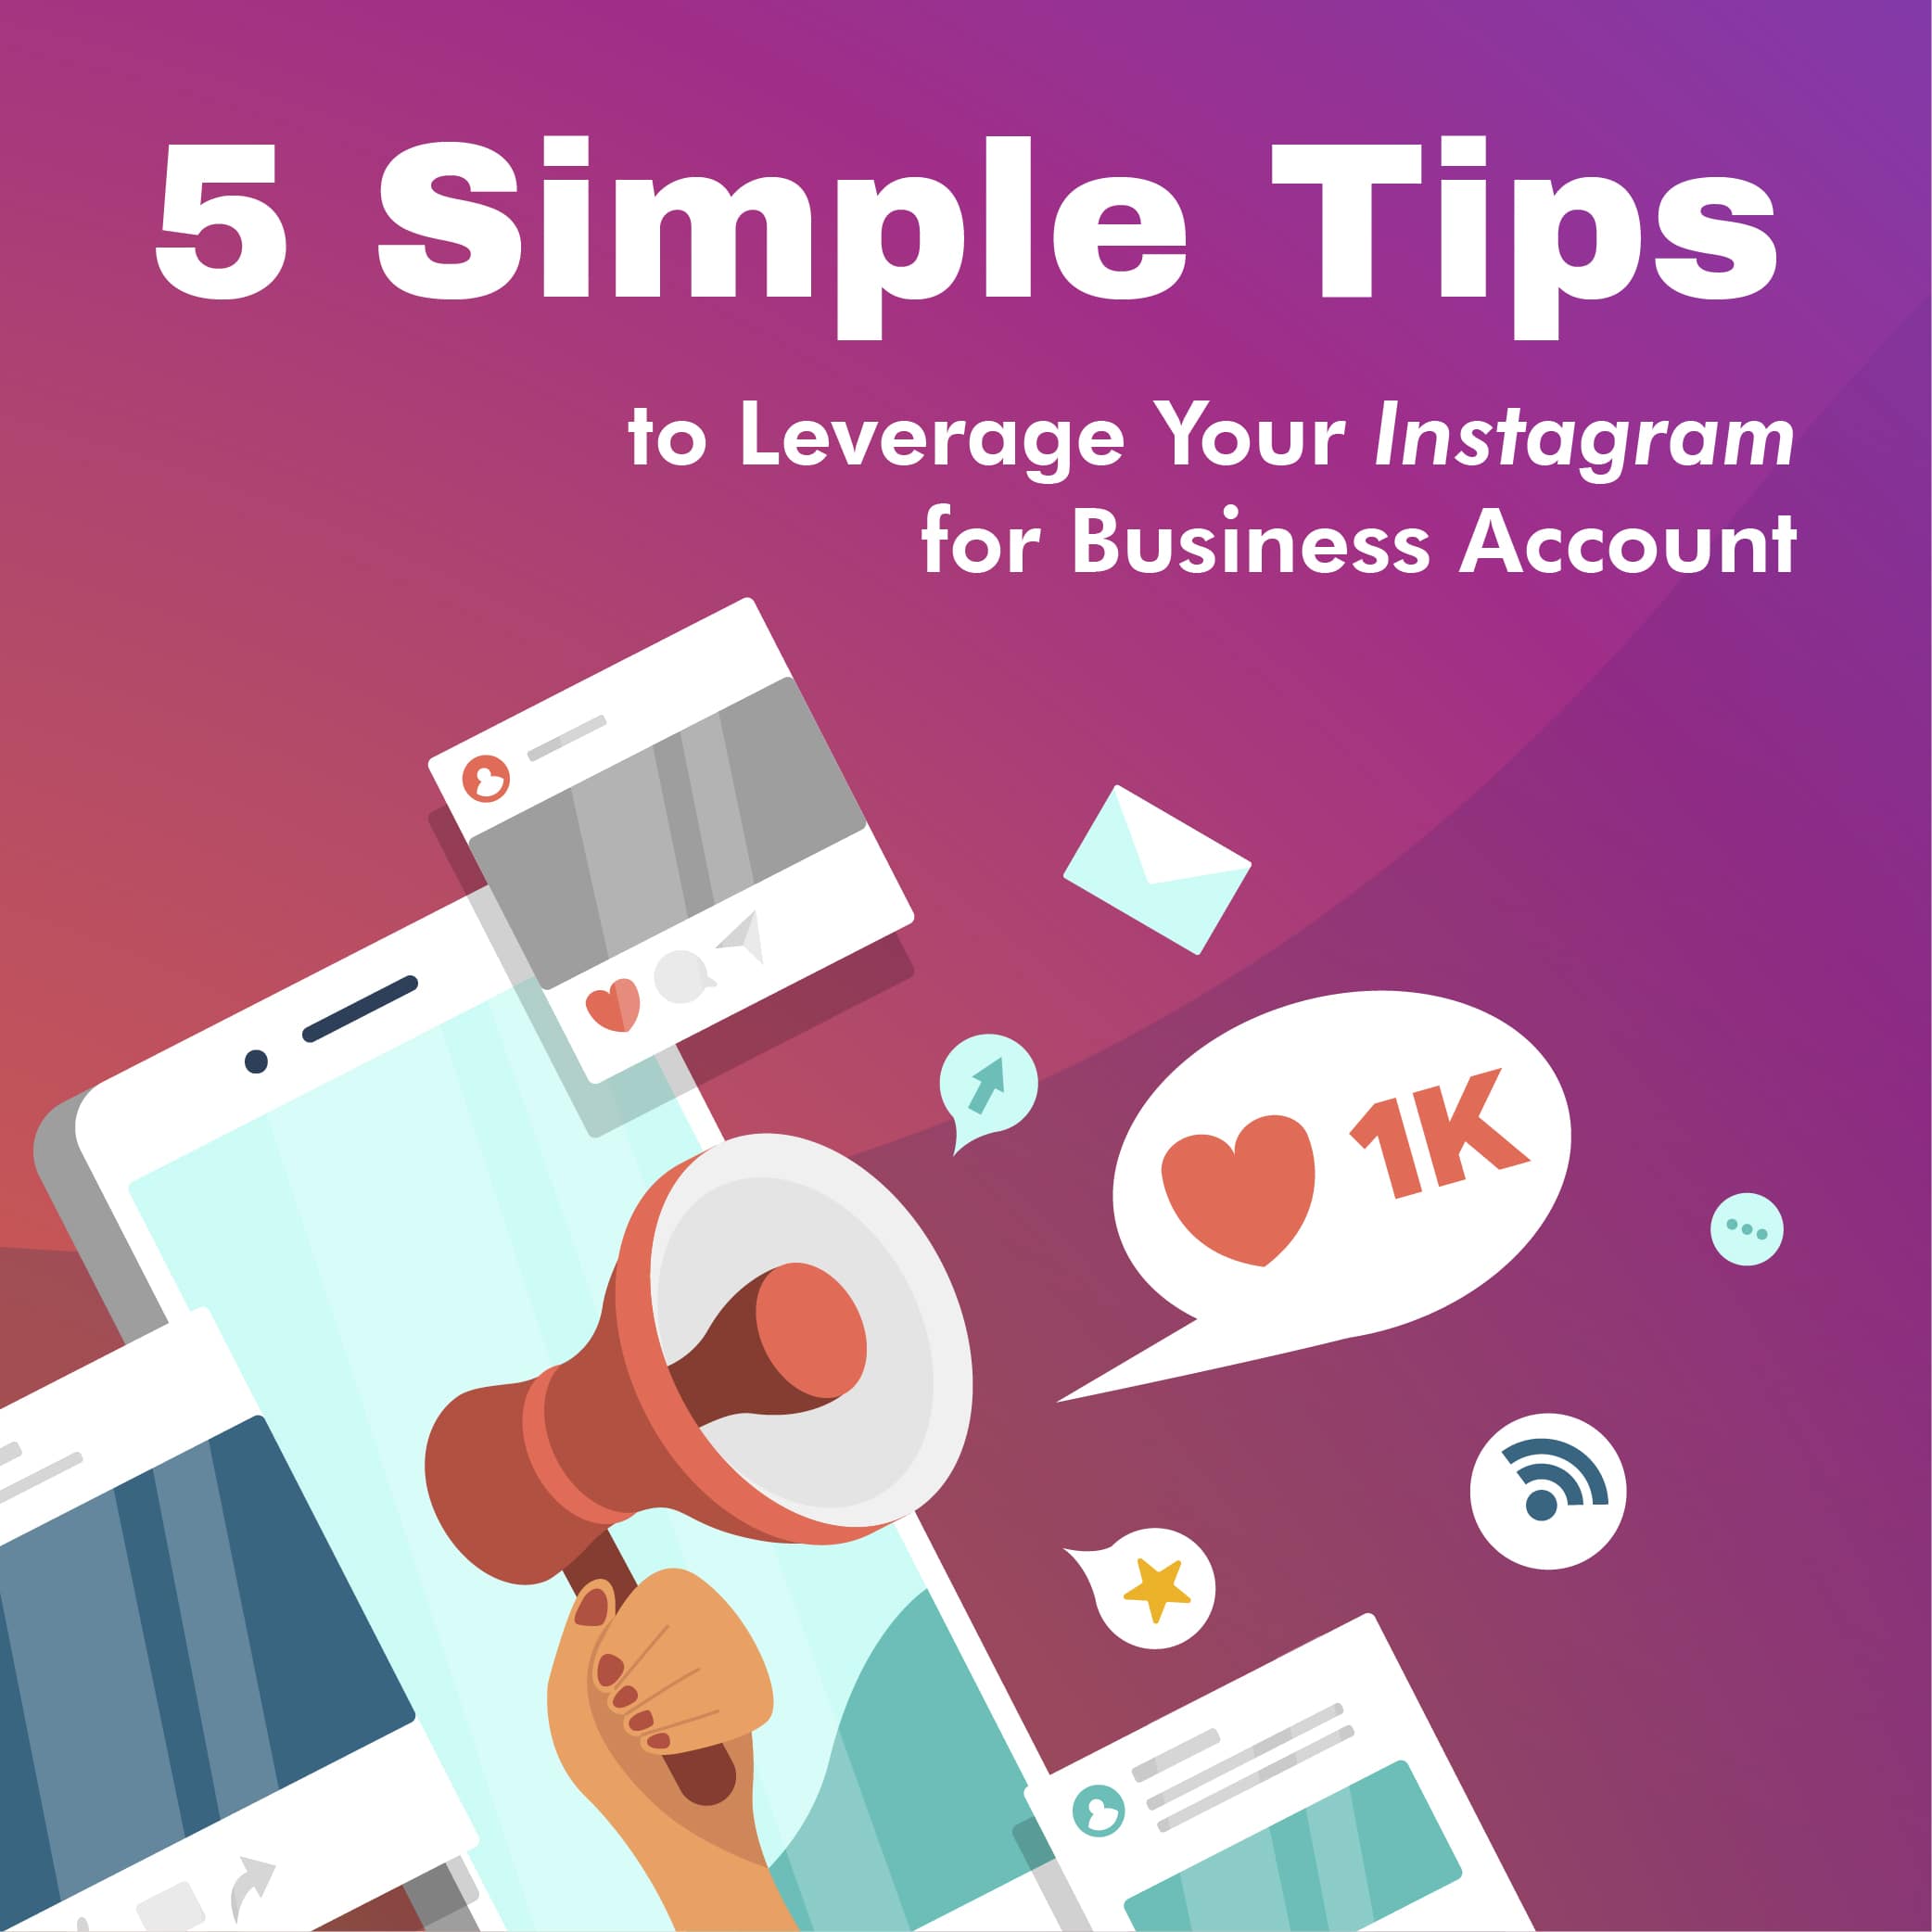 5 Simple Tips to Leverage Your Instagram for Business Account